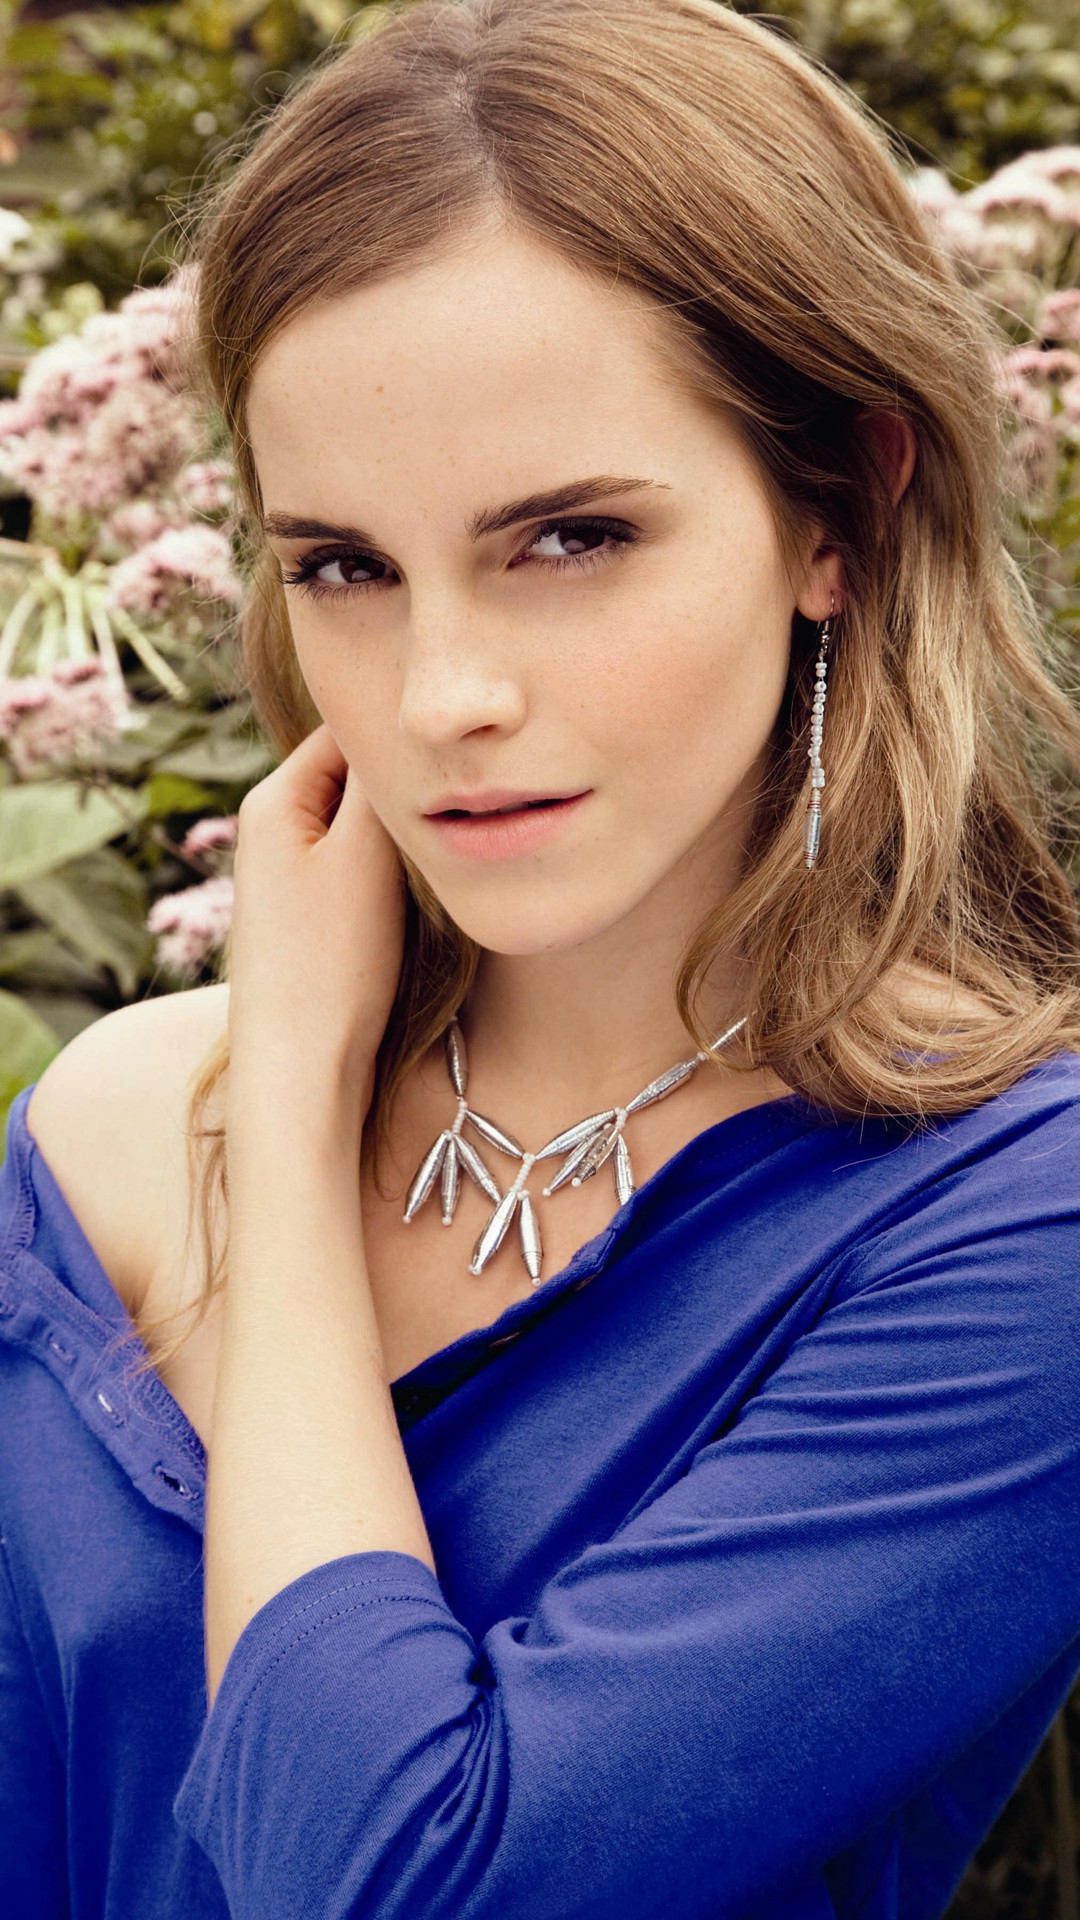 1080x1920 ... Emma Watson iPhone Backgrounds For Desktop, Laptop and Mobiles. Here  You Can Download More than 5 Million Photography collections Uploaded By  Users.